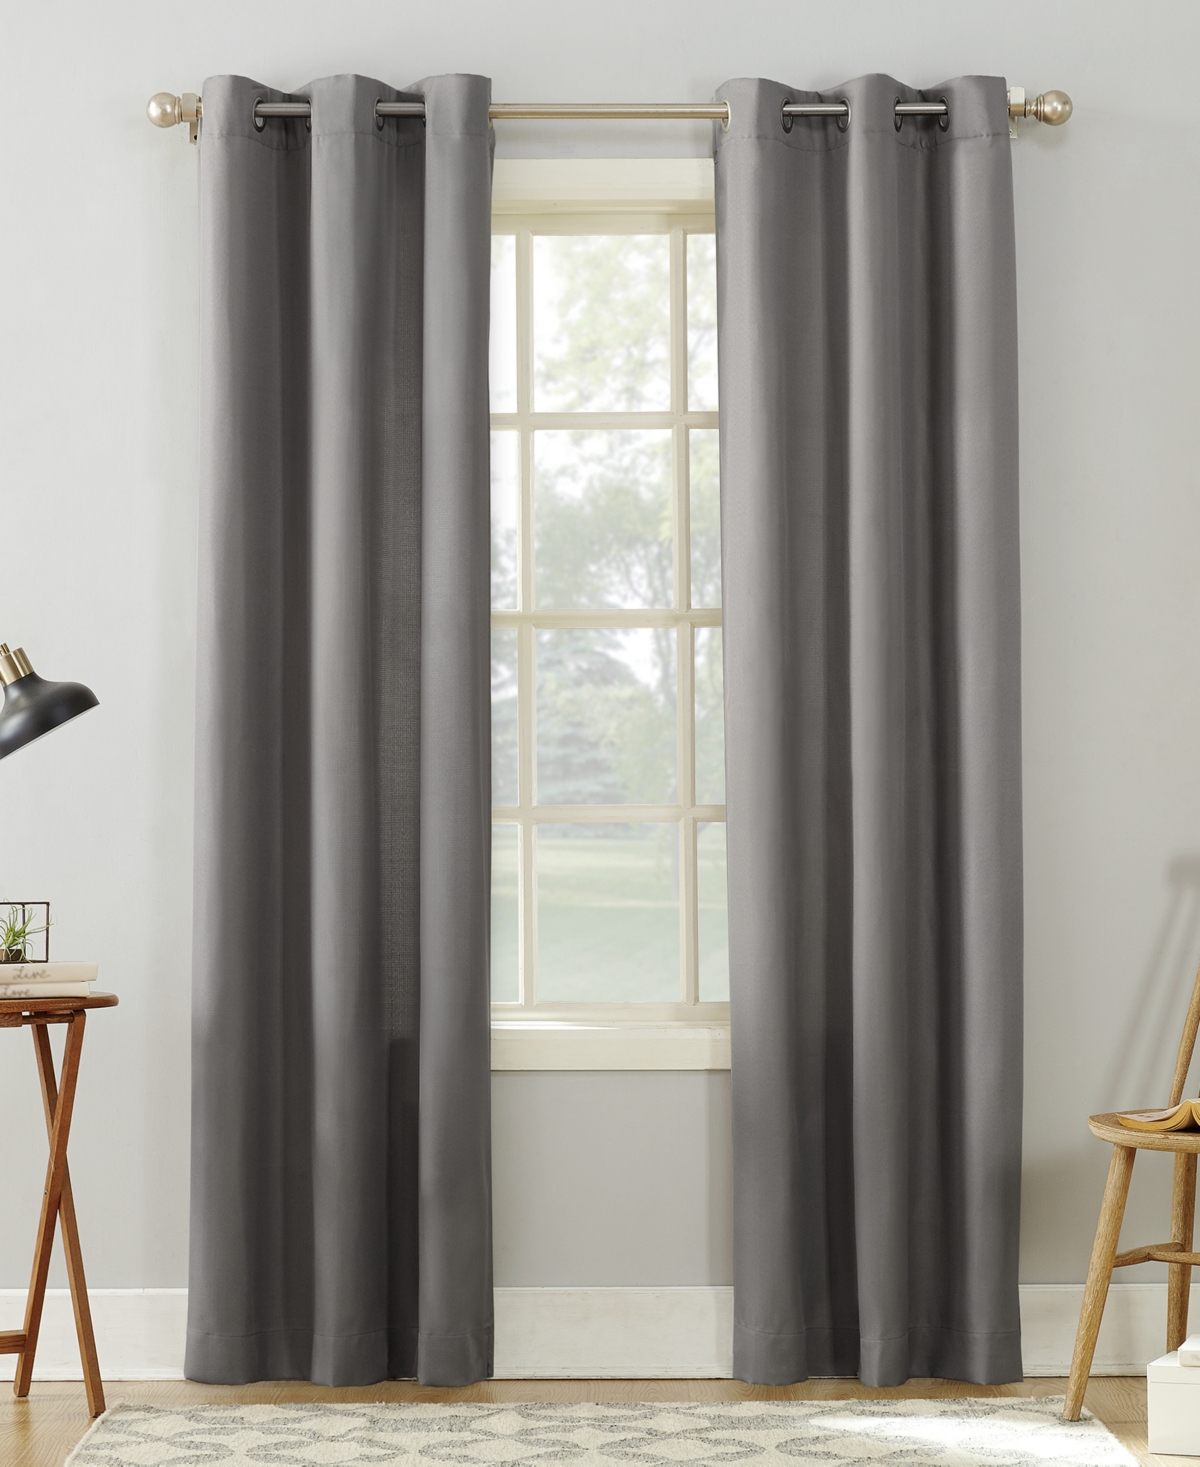 No. 918 Valerie Casual Textured Semi-sheer Grommet Curtain Panel, 40" X 63" In Gray